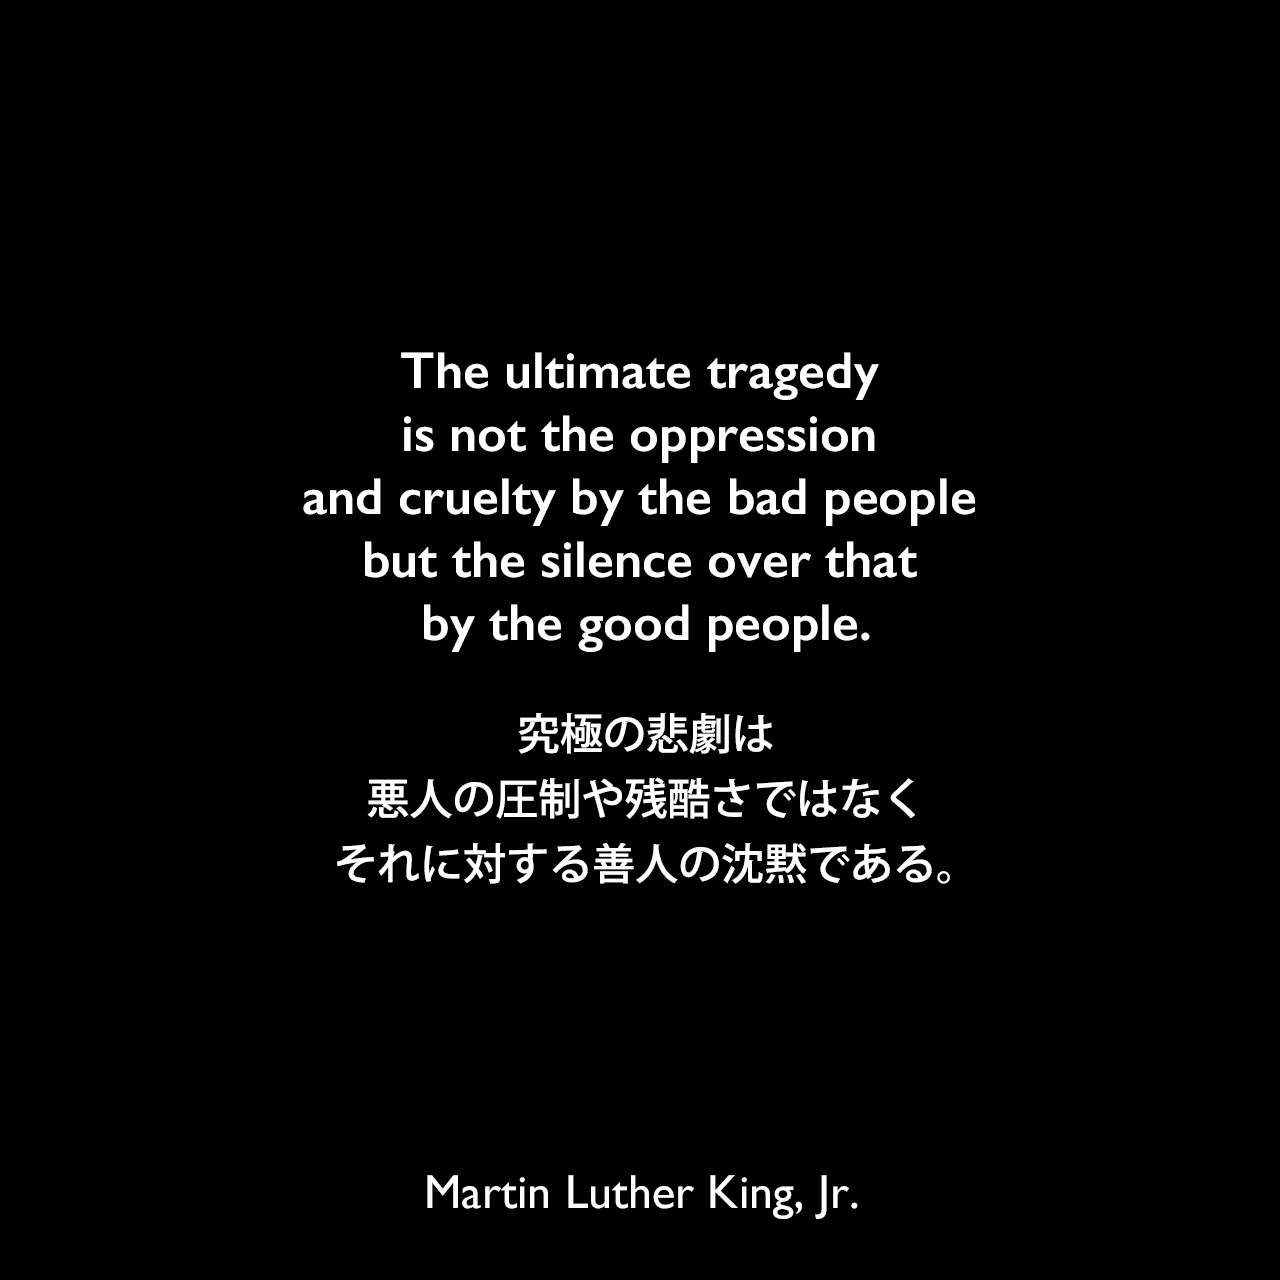 The ultimate tragedy is not the oppression and cruelty by the bad people but the silence over that by the good people.究極の悲劇は、悪人の圧制や残酷さではなく、それに対する善人の沈黙である。Martin Luther King, Jr.